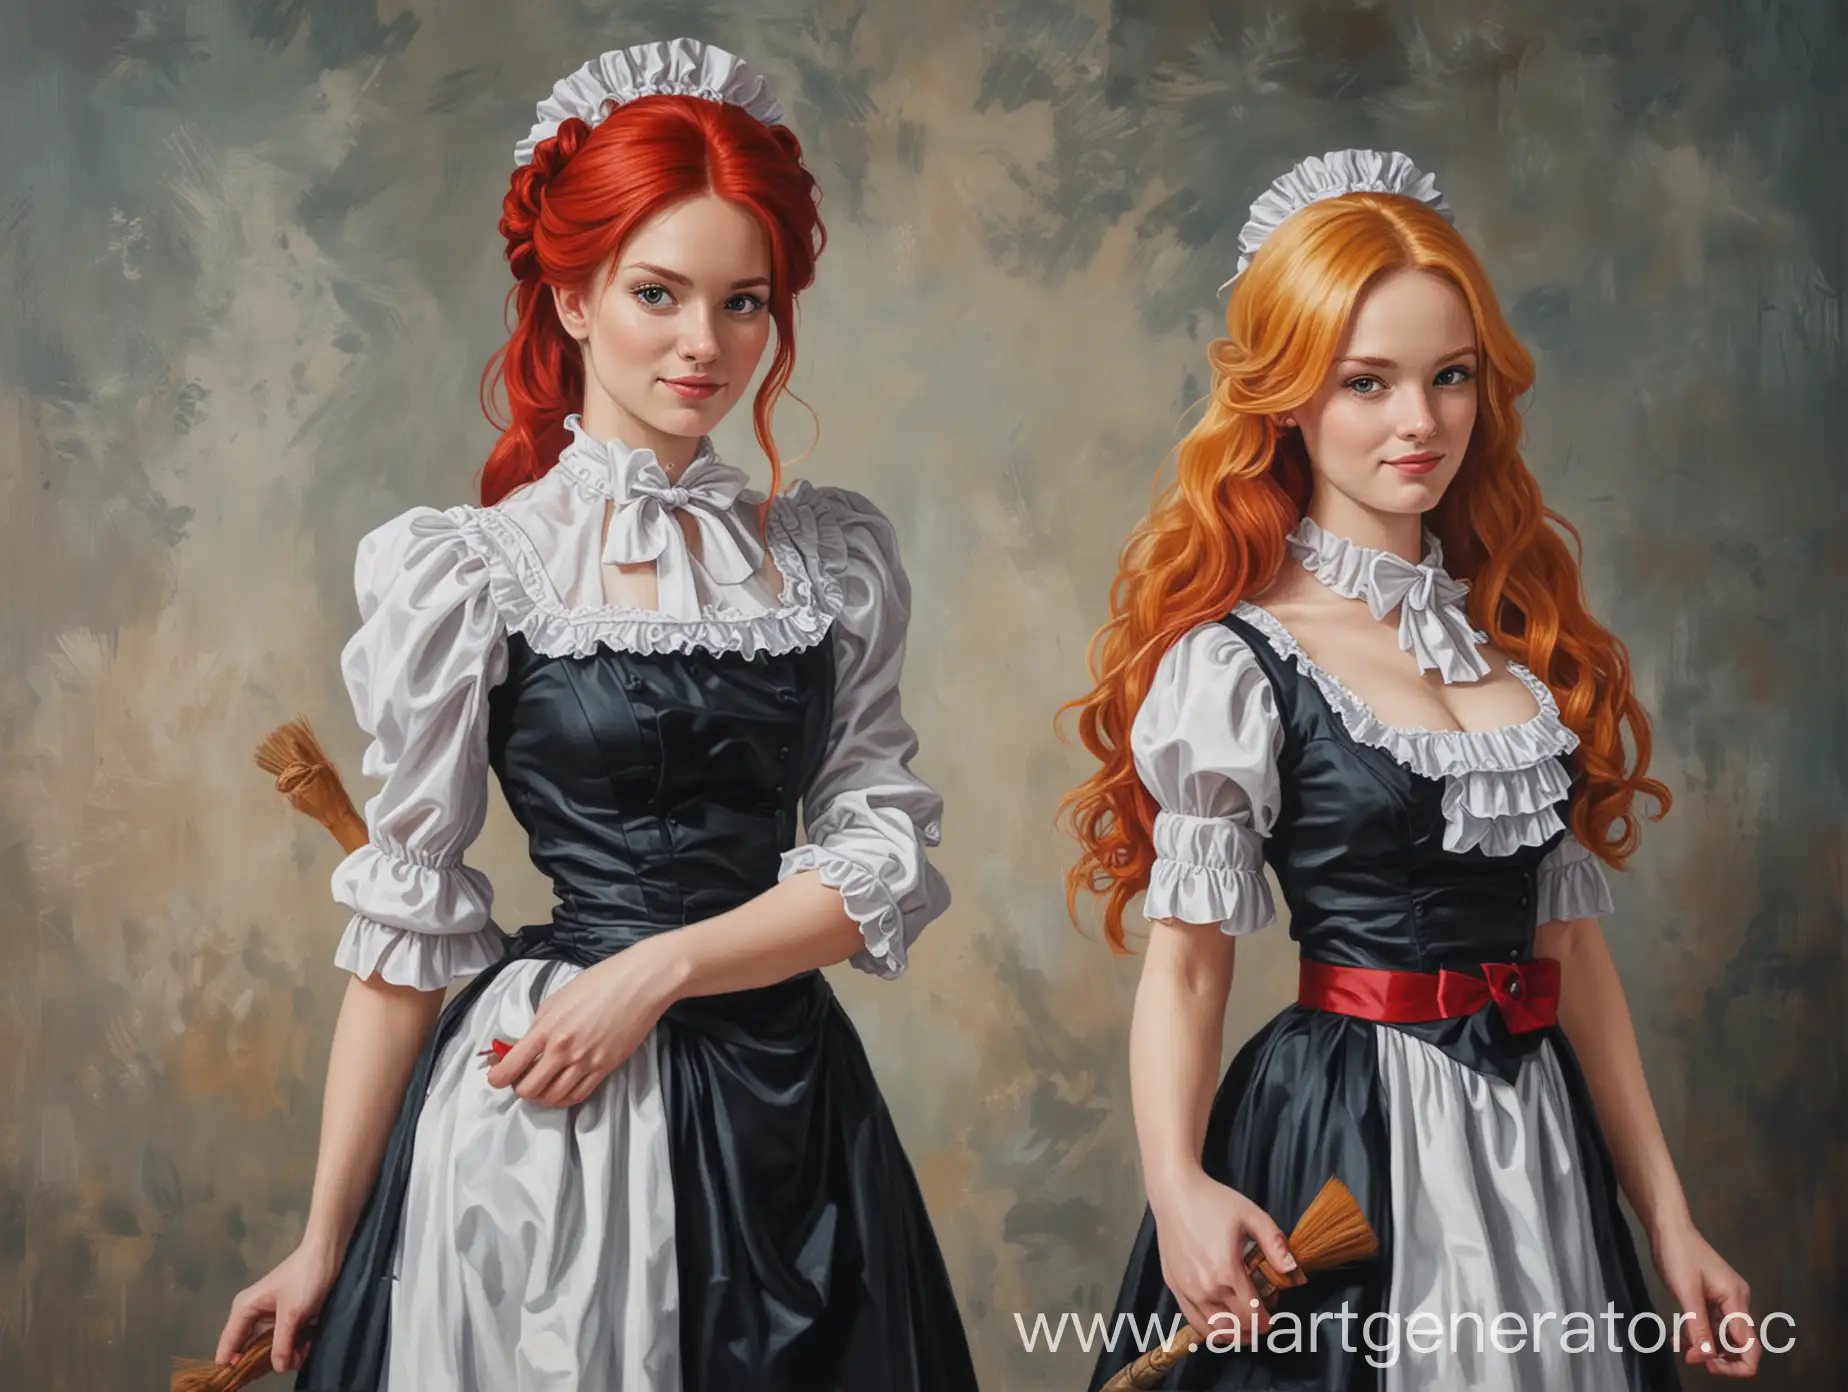 Acrylic-Painting-of-RedHaired-Maid-and-Blonde-Aristocrat-in-FullLength-Portrait